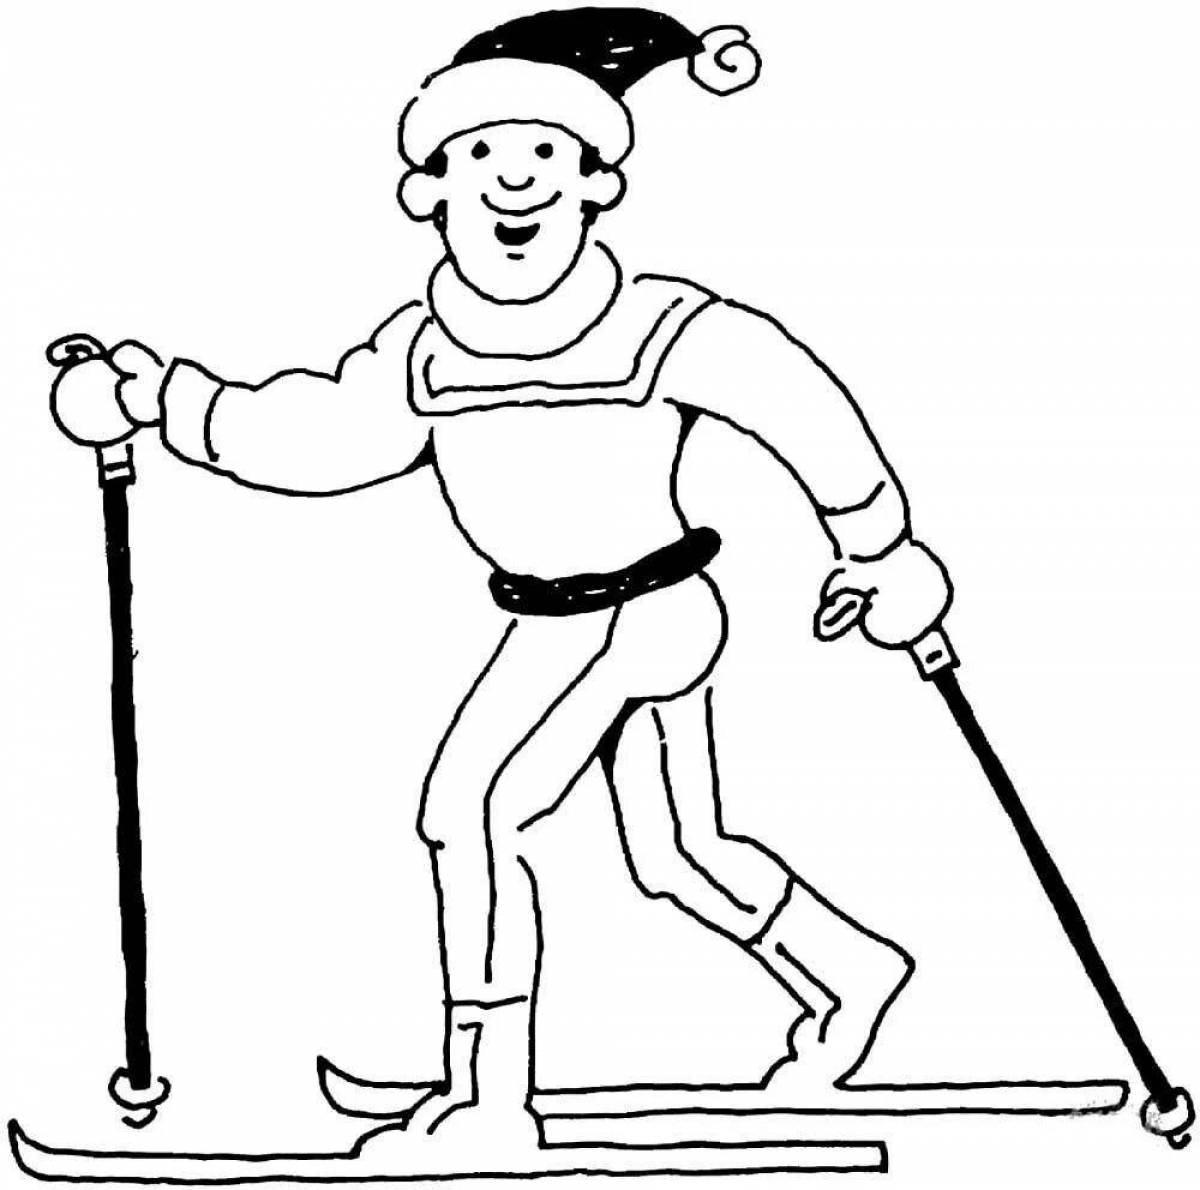 Playful skier coloring page for kids